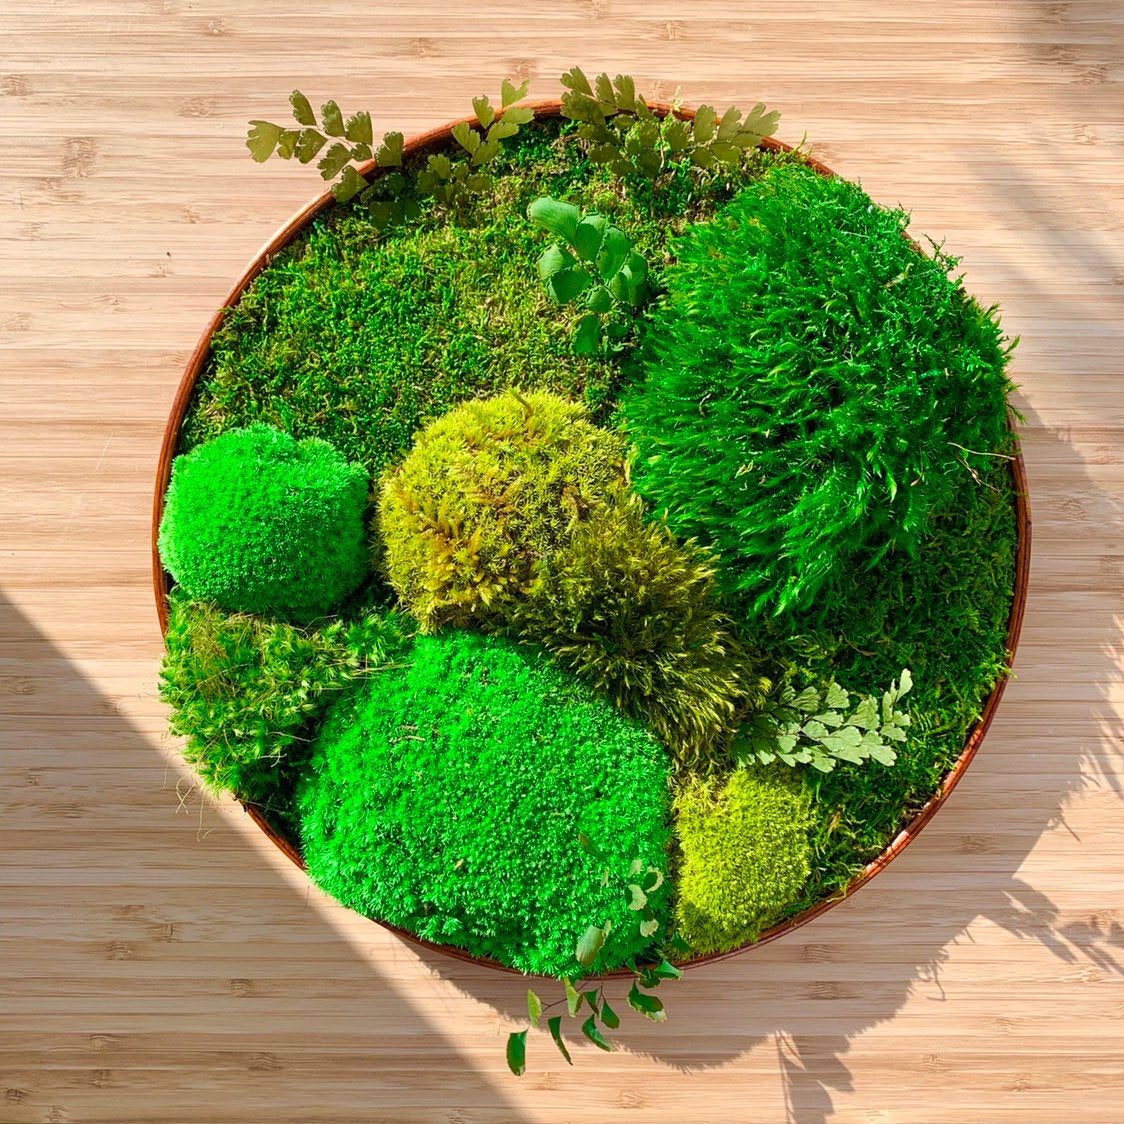 Pssopp Decorative Moss,Table Skirts Preserved Decorative Moss Durable  Preserved Moss Green DIY Kit for Home Decorations Model Making Gardenning  Art